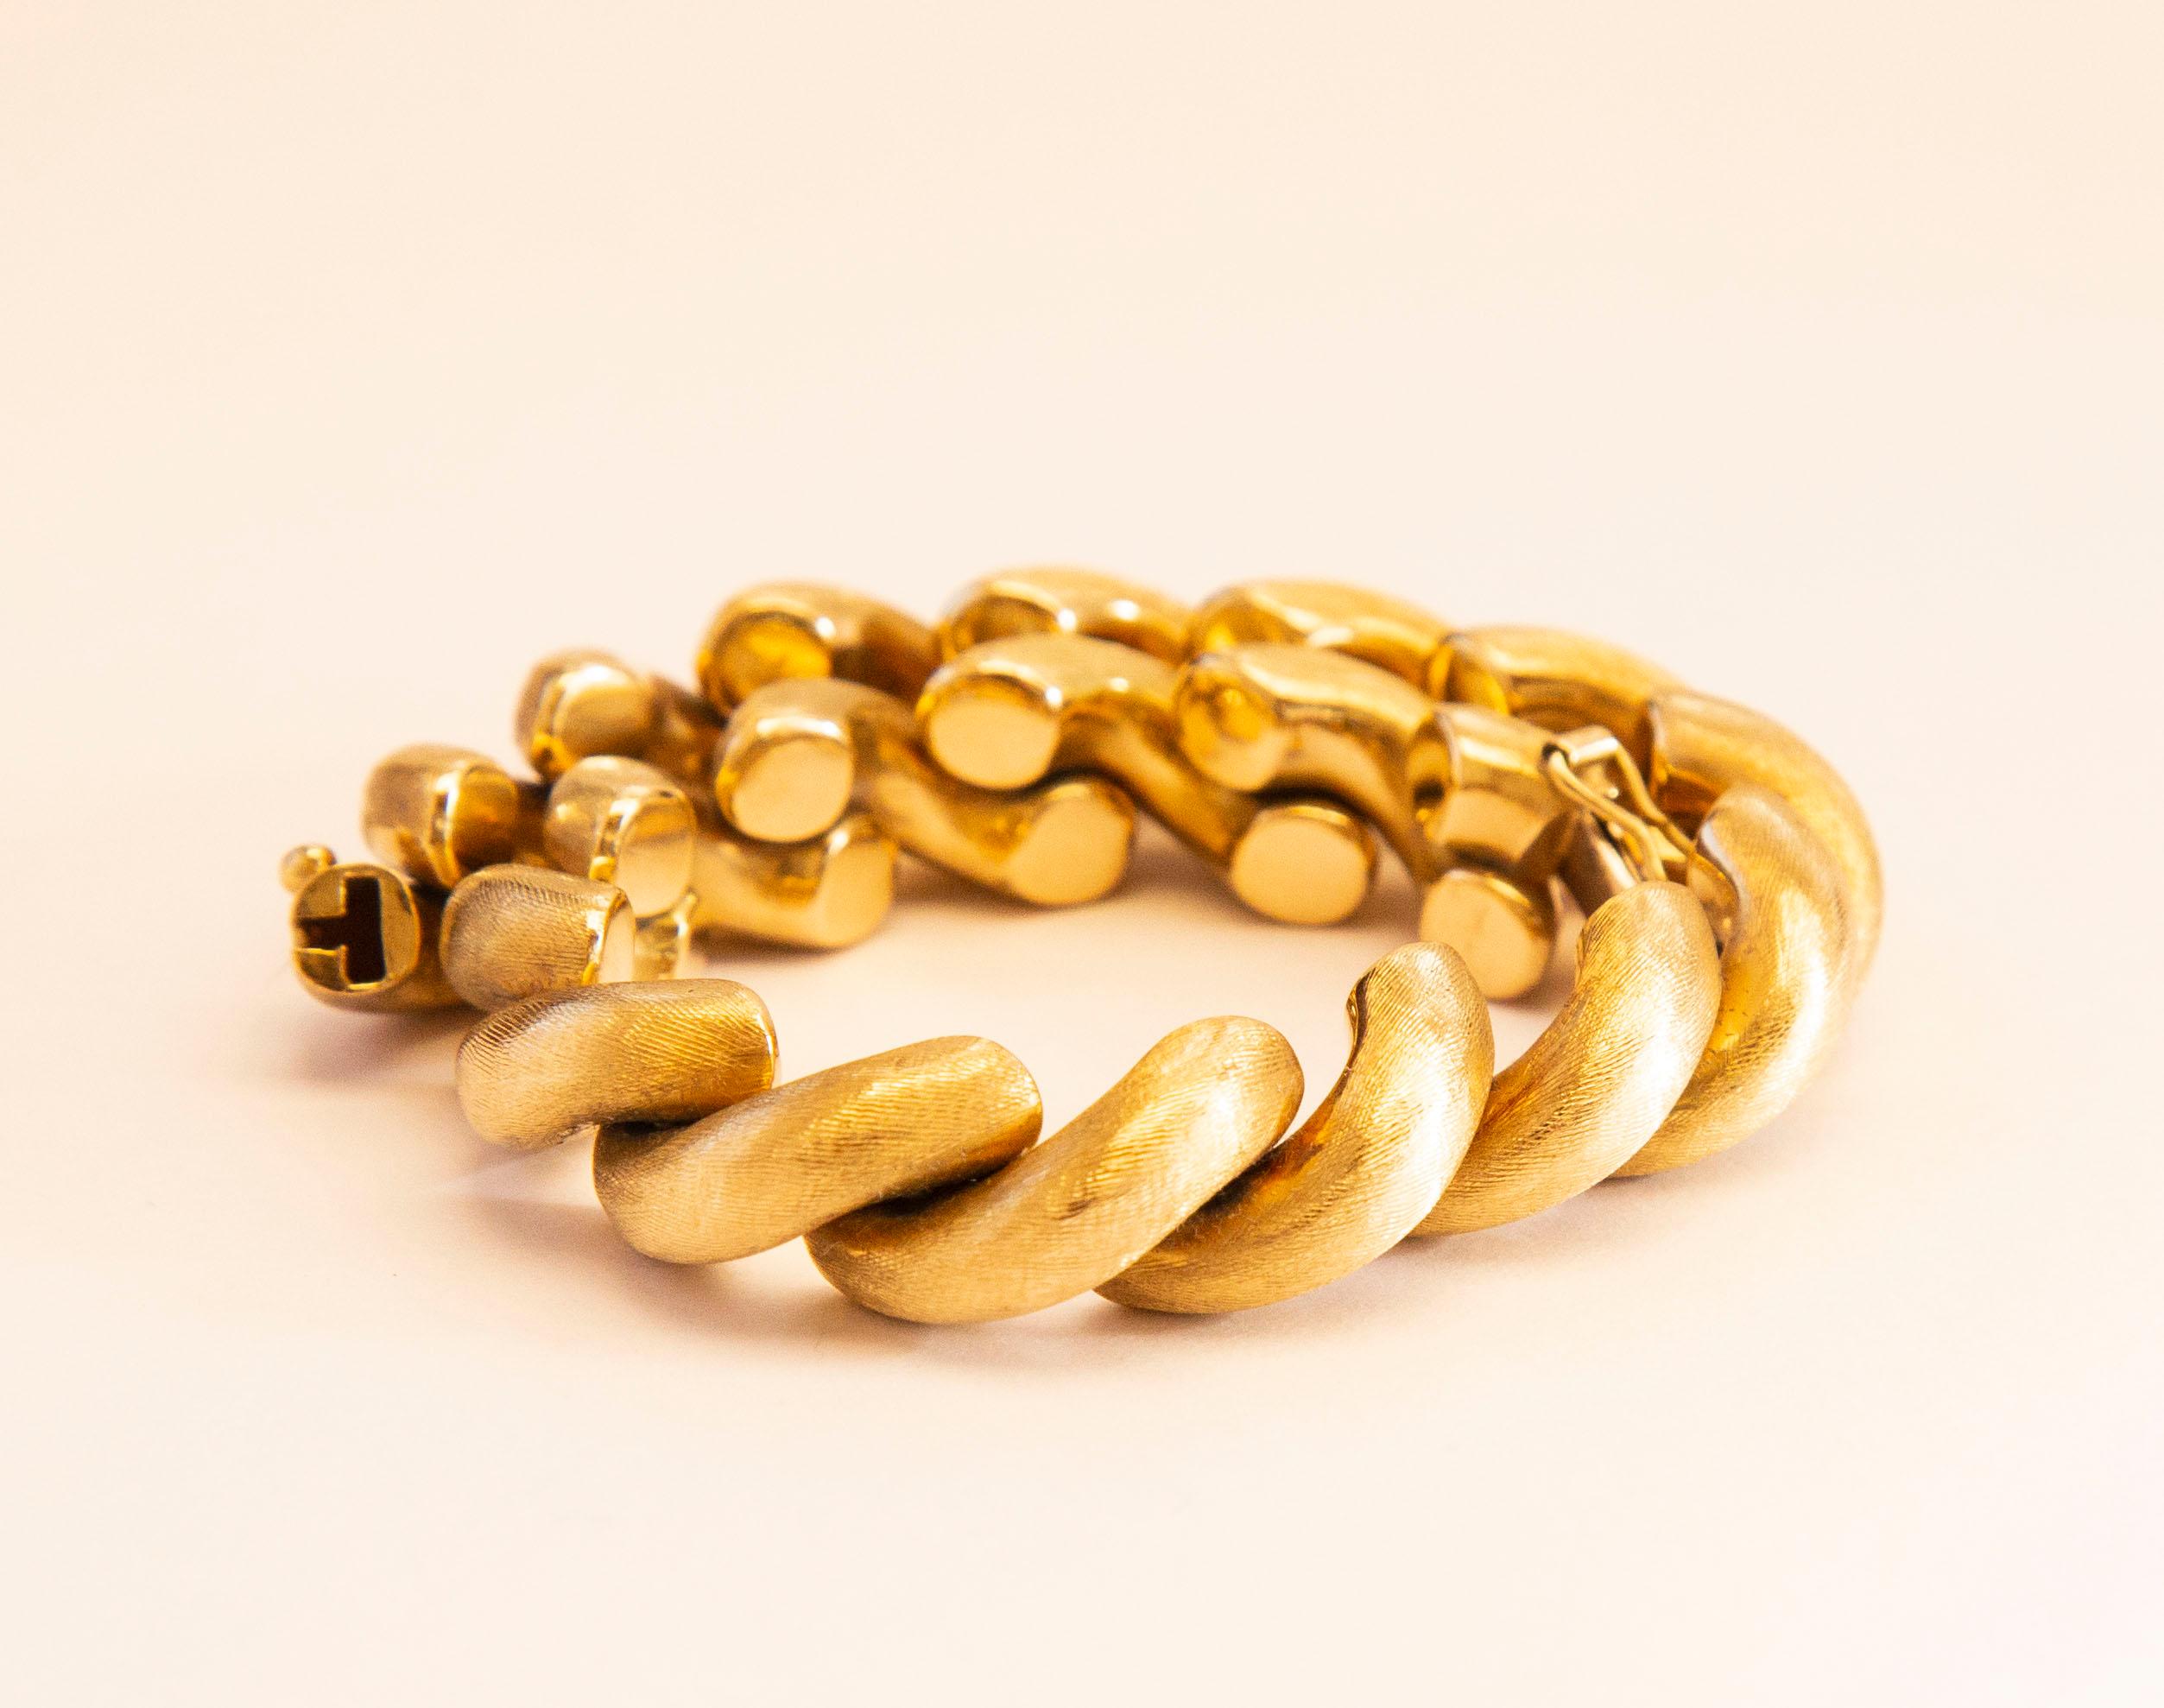 A vintage 18 karat/750 yellow gold half-chain link San Marco Macaroni bracelet with matte and textured finish. The bracelet is very elegant and it will be definitely an eye catcher and a statement bold piece for any woman. It has an insert clasp and